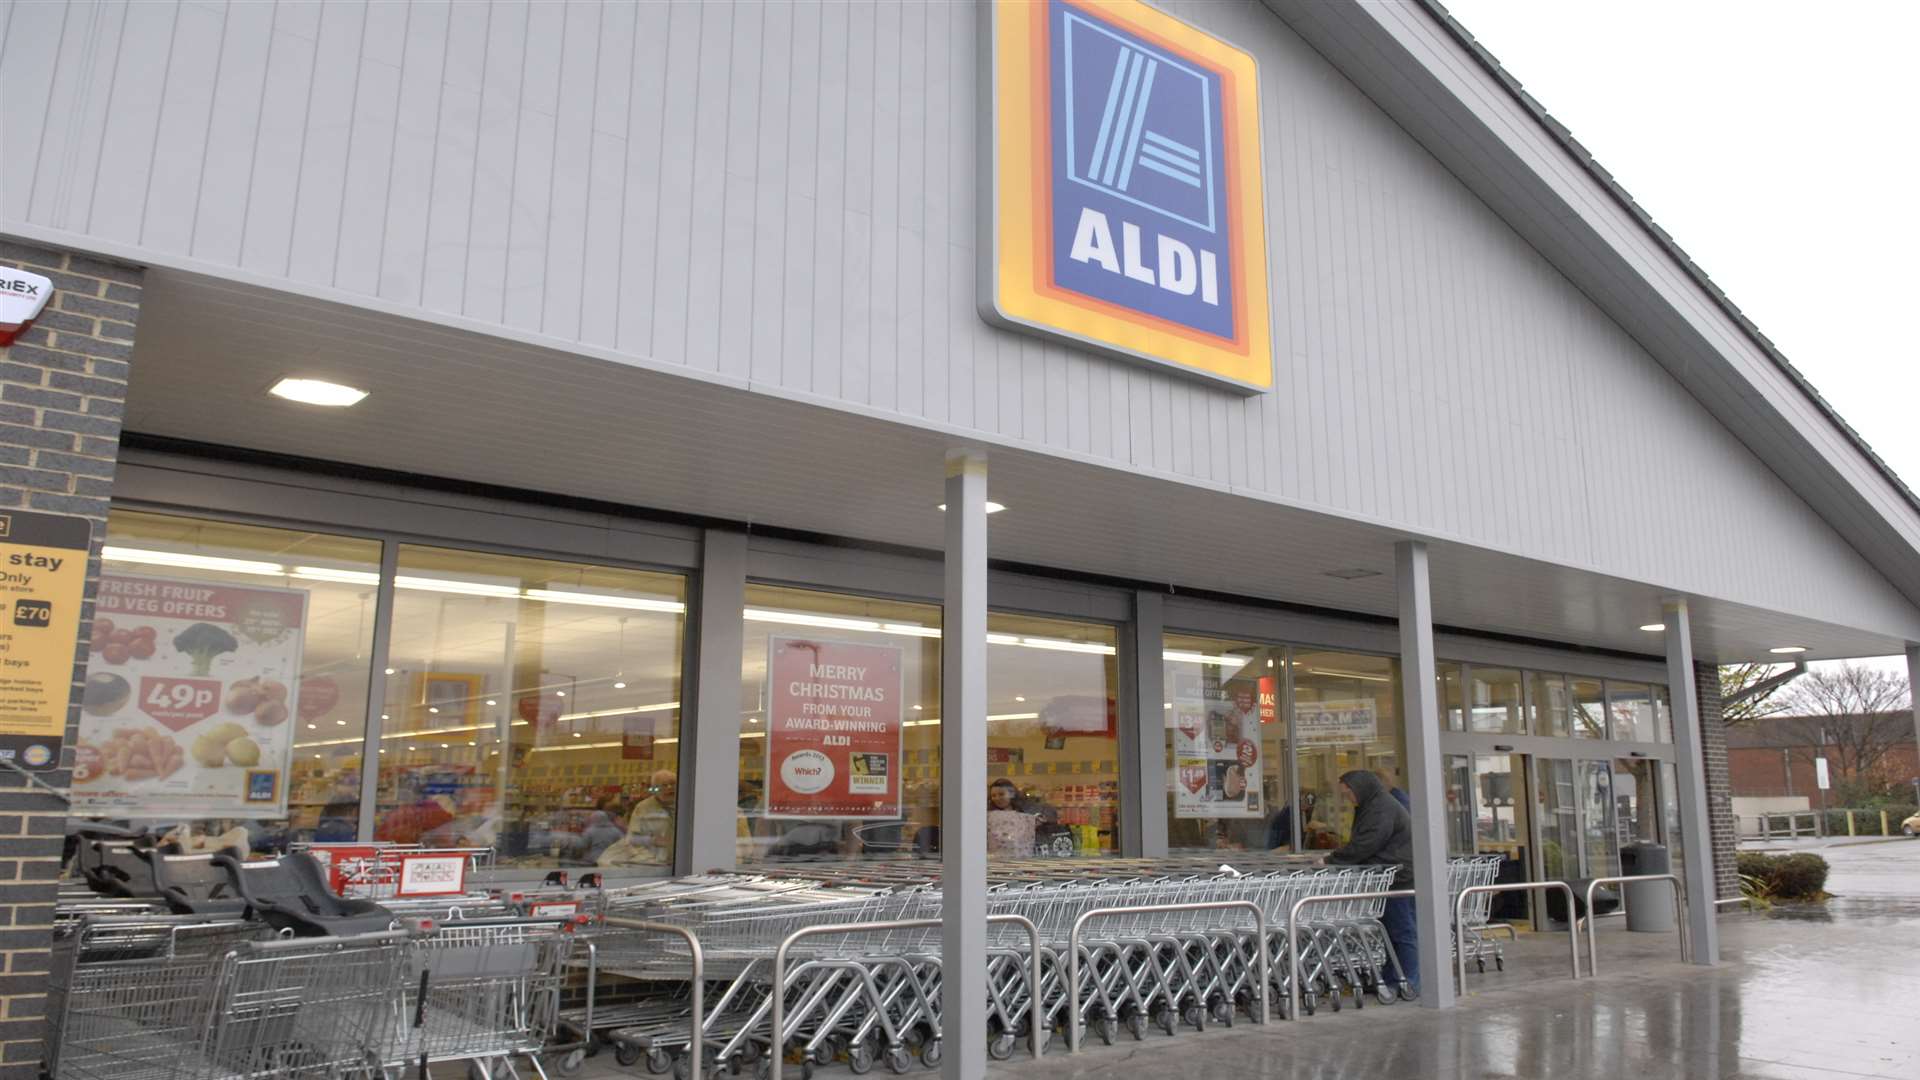 Aldi in Sheerness: Is this what the new Aldi store in Ashford could look like?